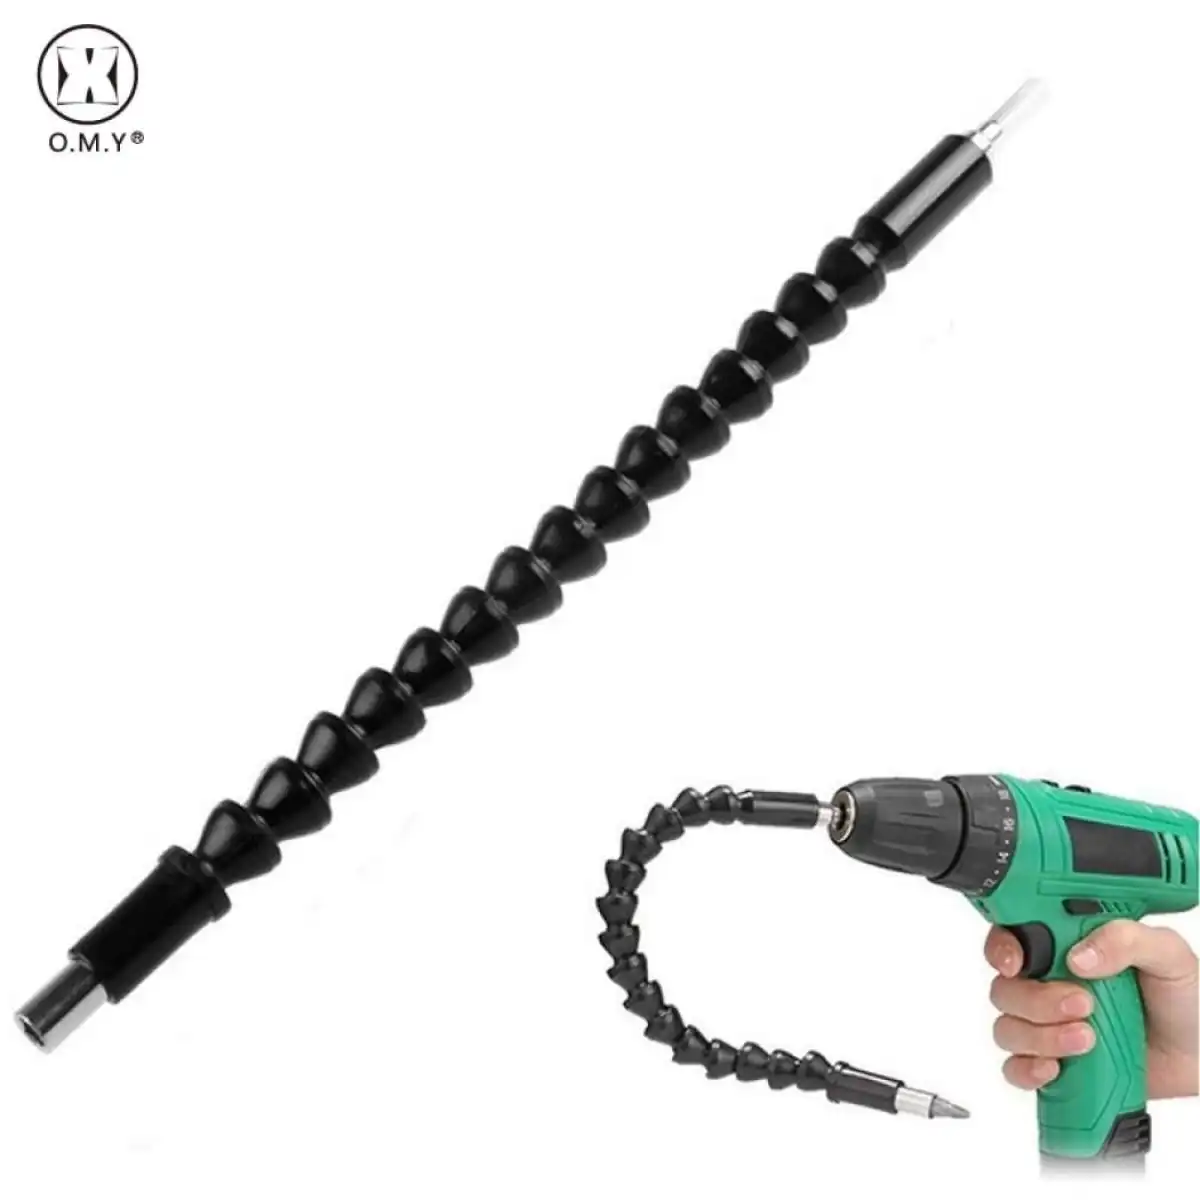 Flexible Extension Screwdriver Bit Holder Magnetic Extention Hex Shaft Screw Power Drill Connection Tip 11.8 inch Flex Adapter W//Extend Drive Quick Change Connect Adaptor Size Hexagon 1//4